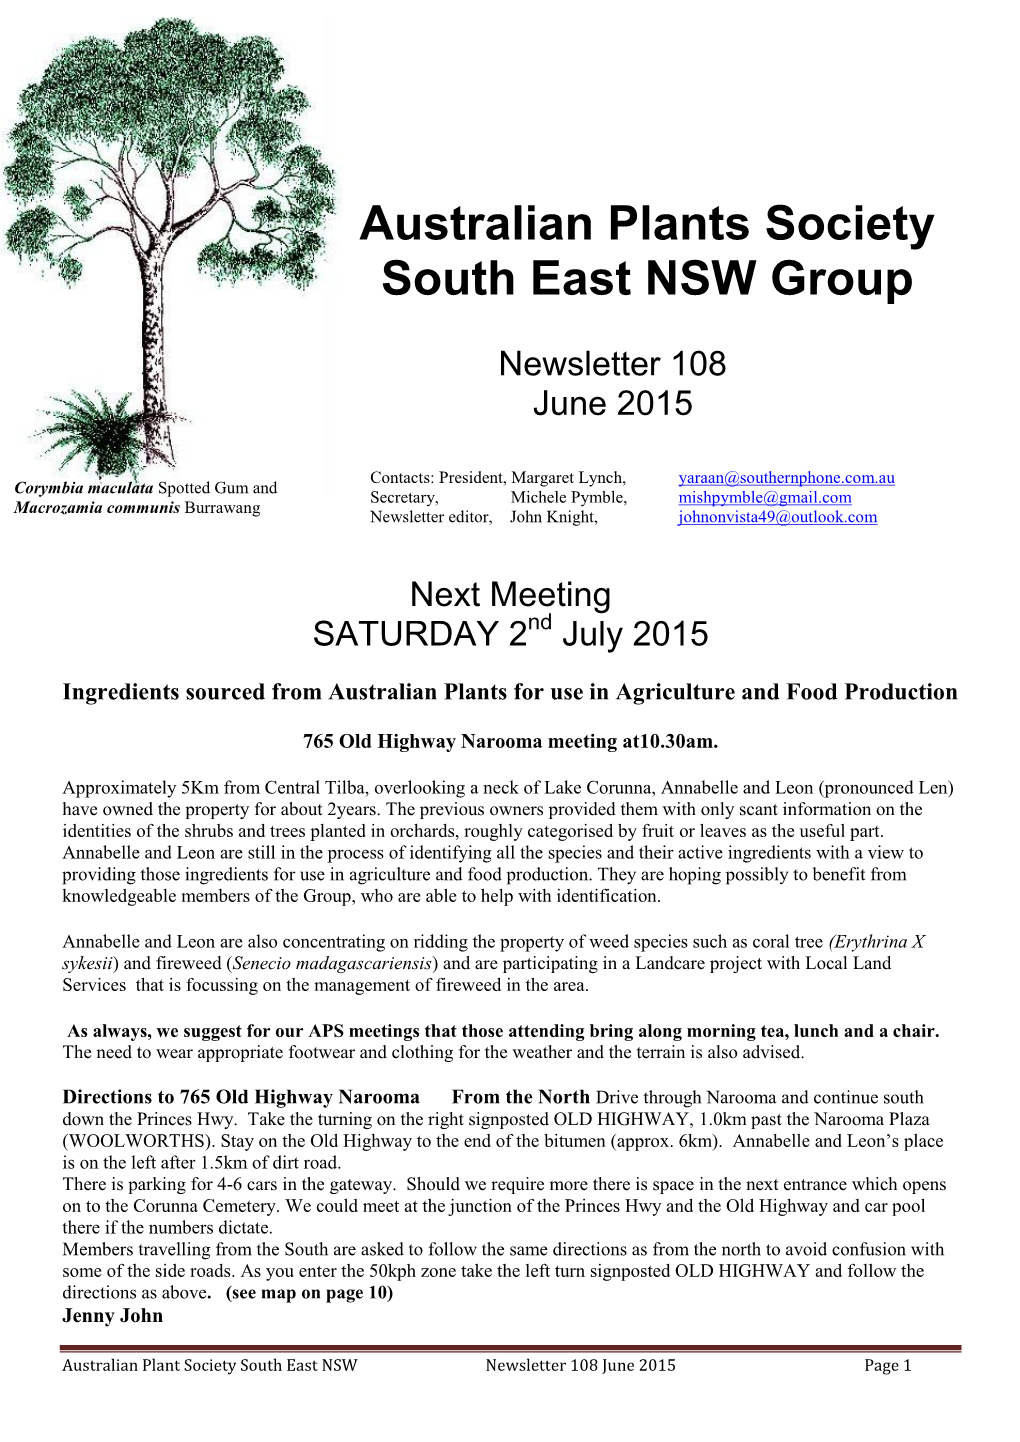 Australian Plants Society South East NSW Group